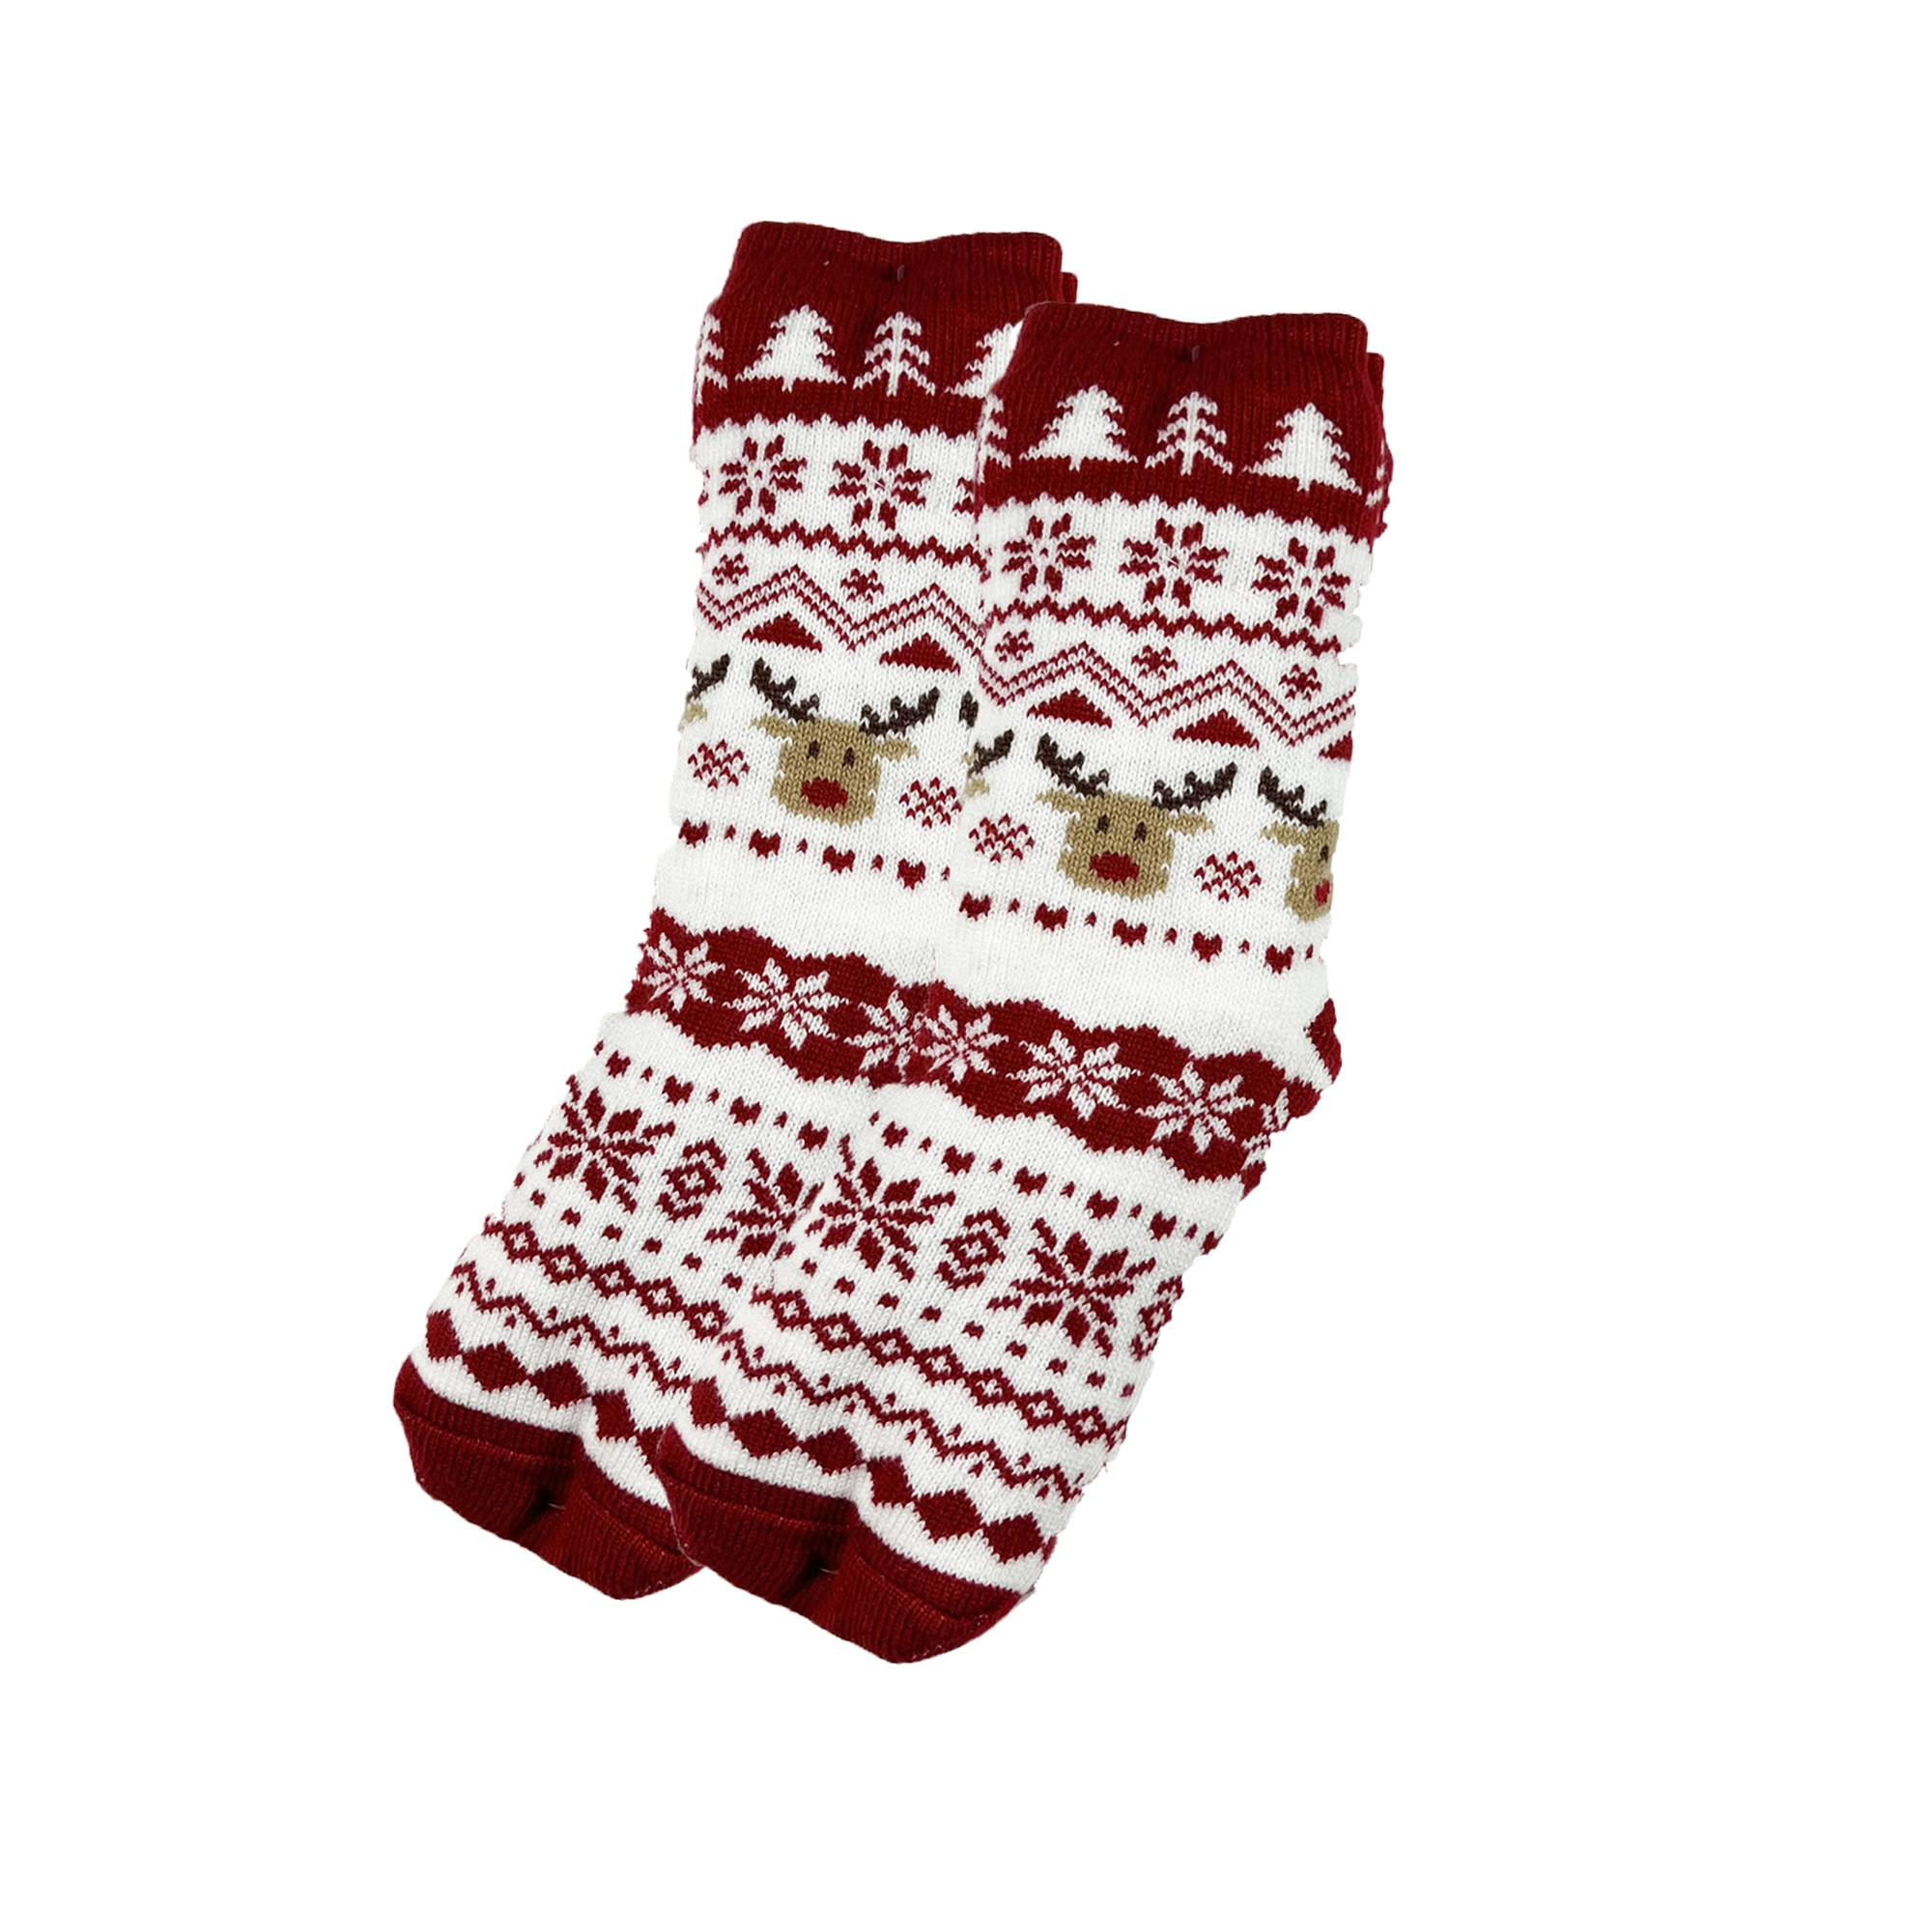 RUDOLF - House socks - non-slip - with sherpa lining - one size - biking red - red